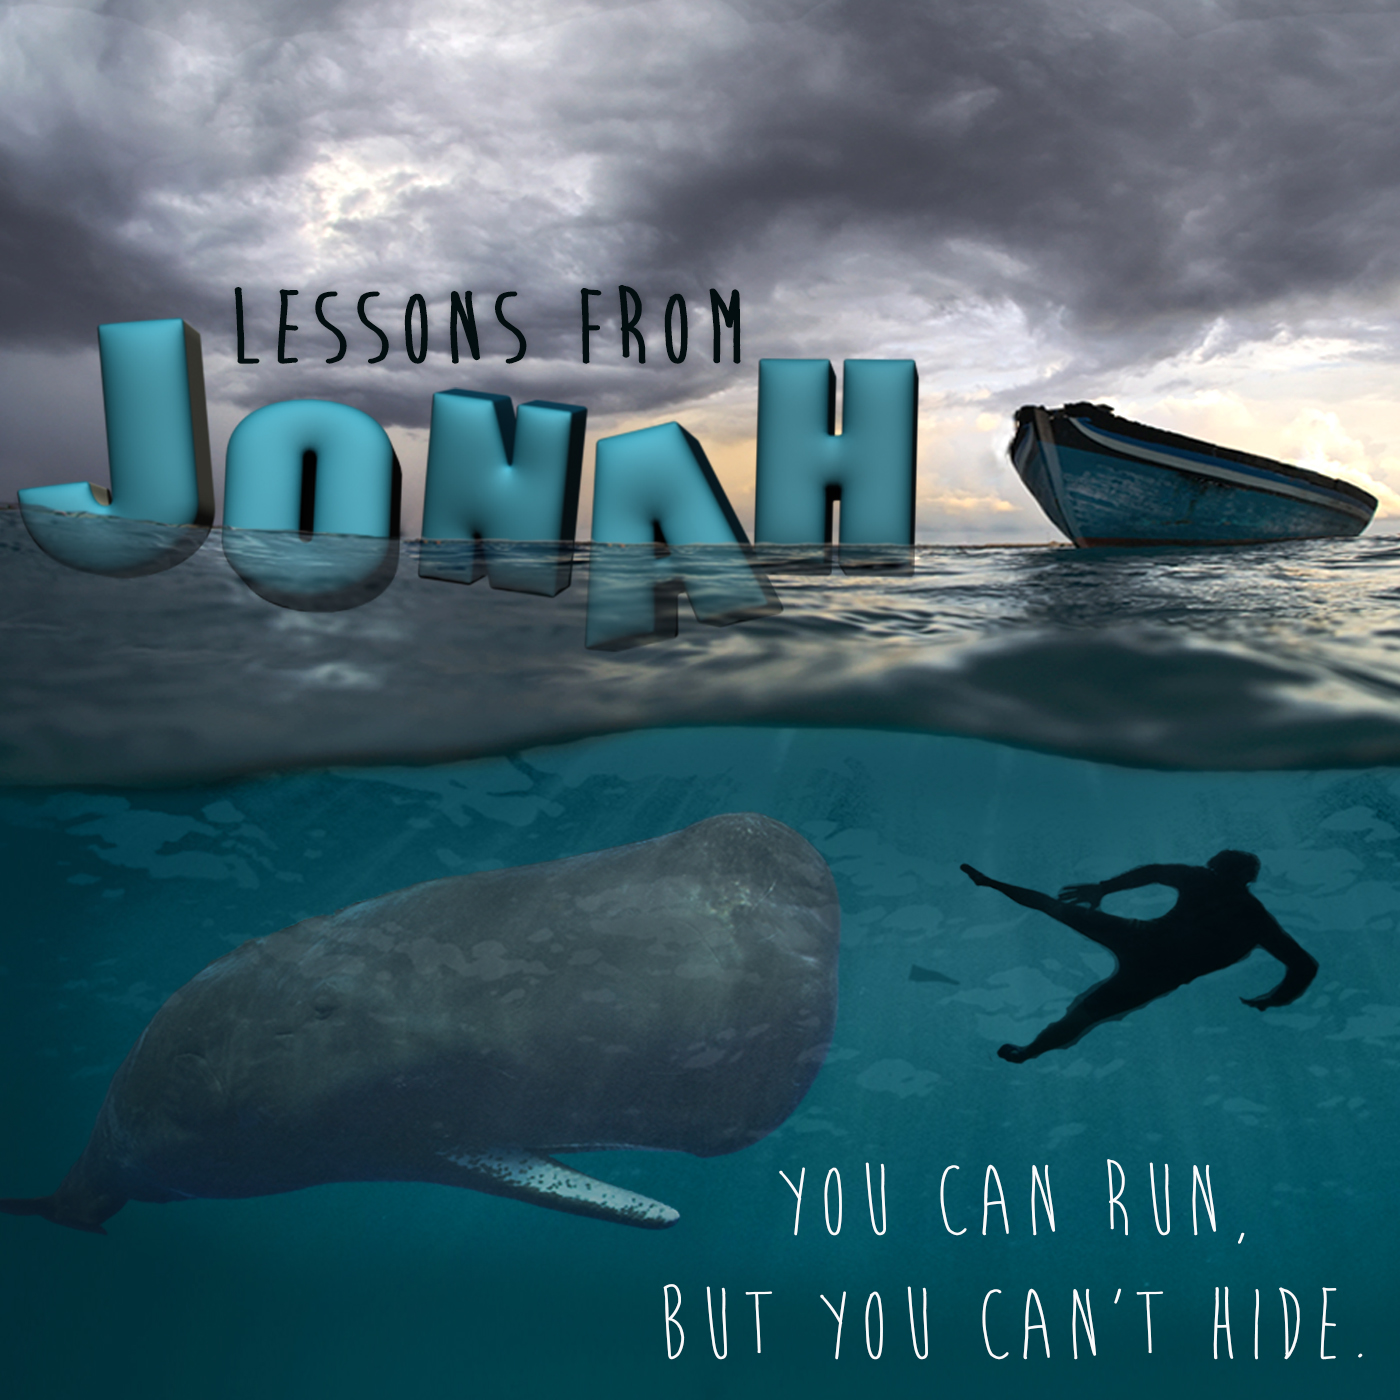 Lessons From Jonah #3